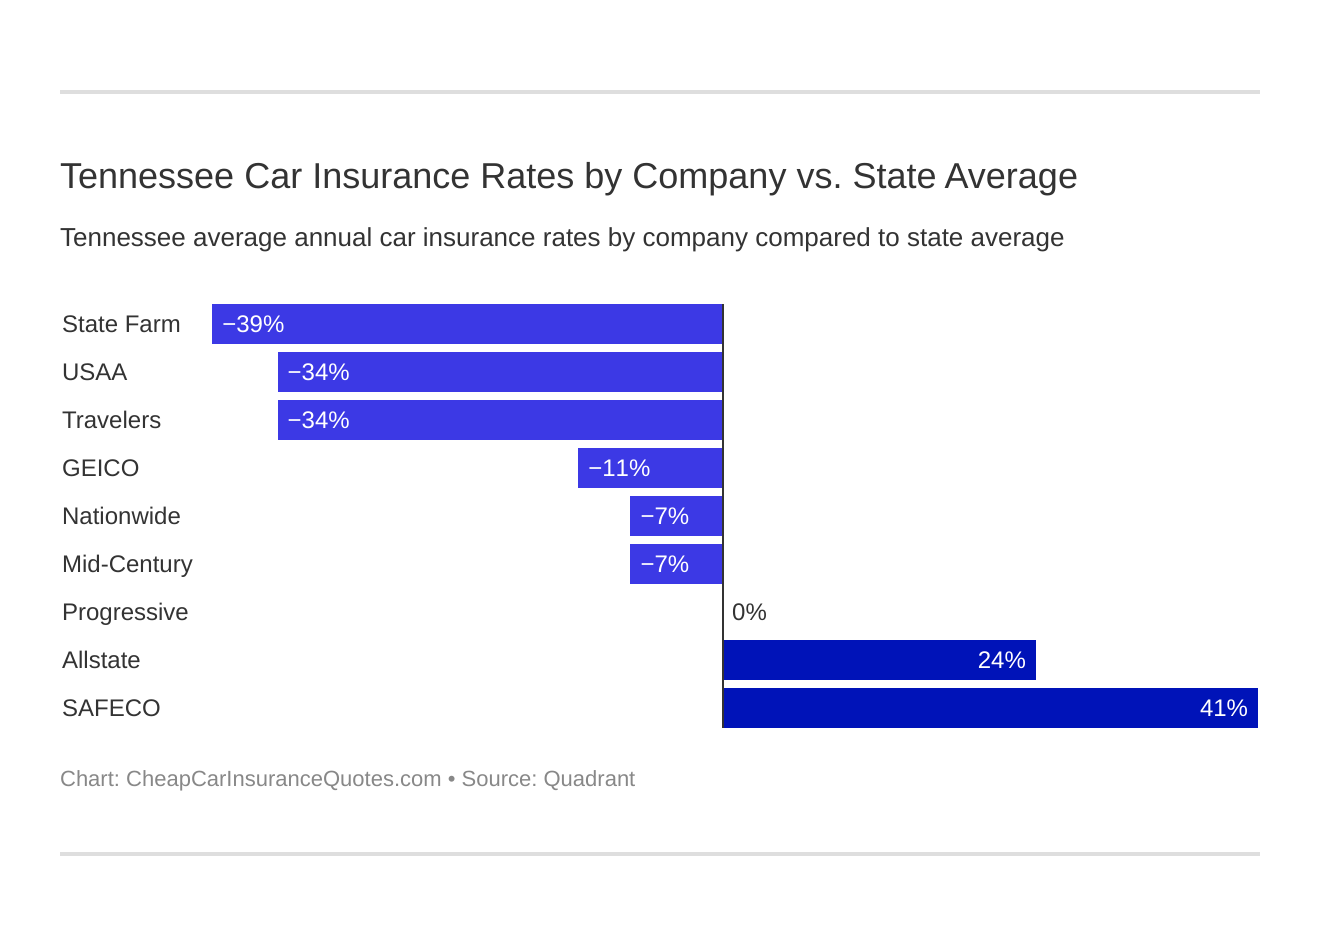 Tennessee Car Insurance Rates by Company vs. State Average